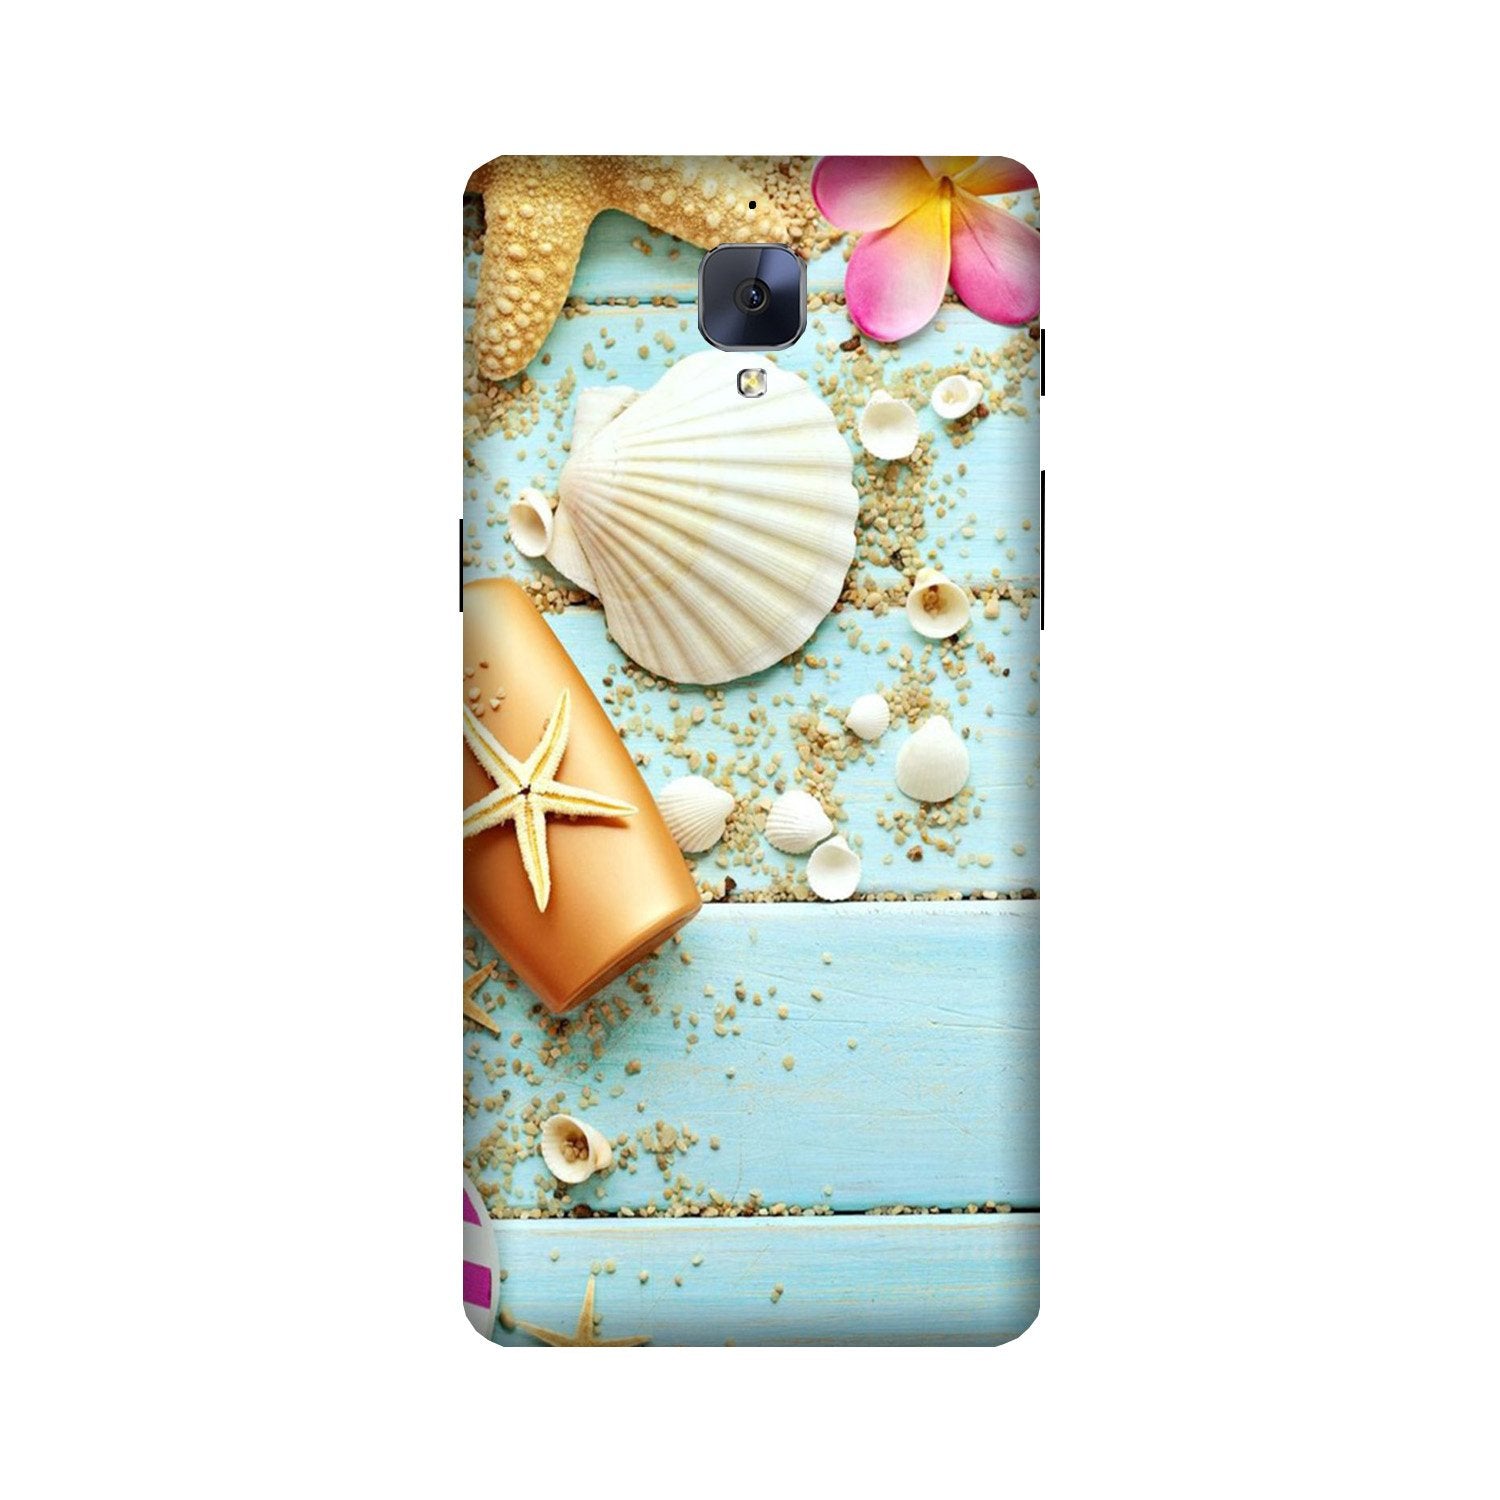 Sea Shells Case for OnePlus 3/ 3T